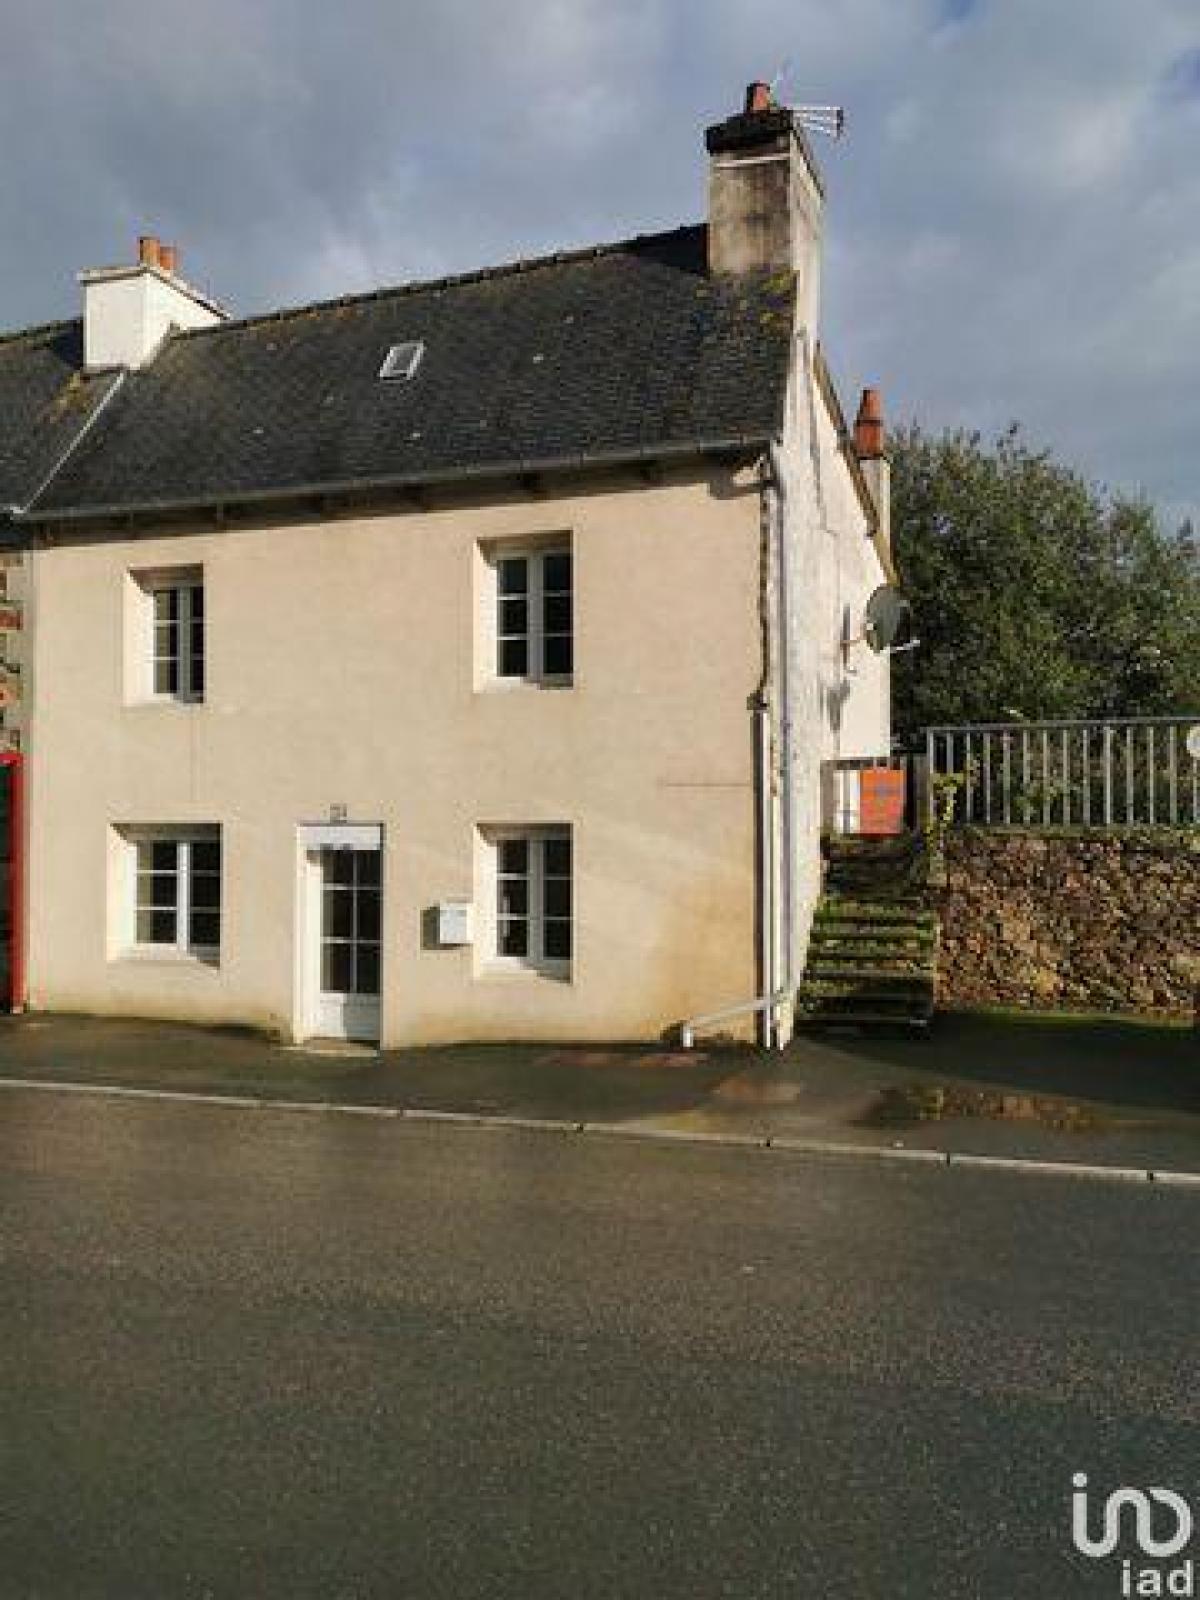 Picture of Home For Sale in Pontrieux, Bretagne, France